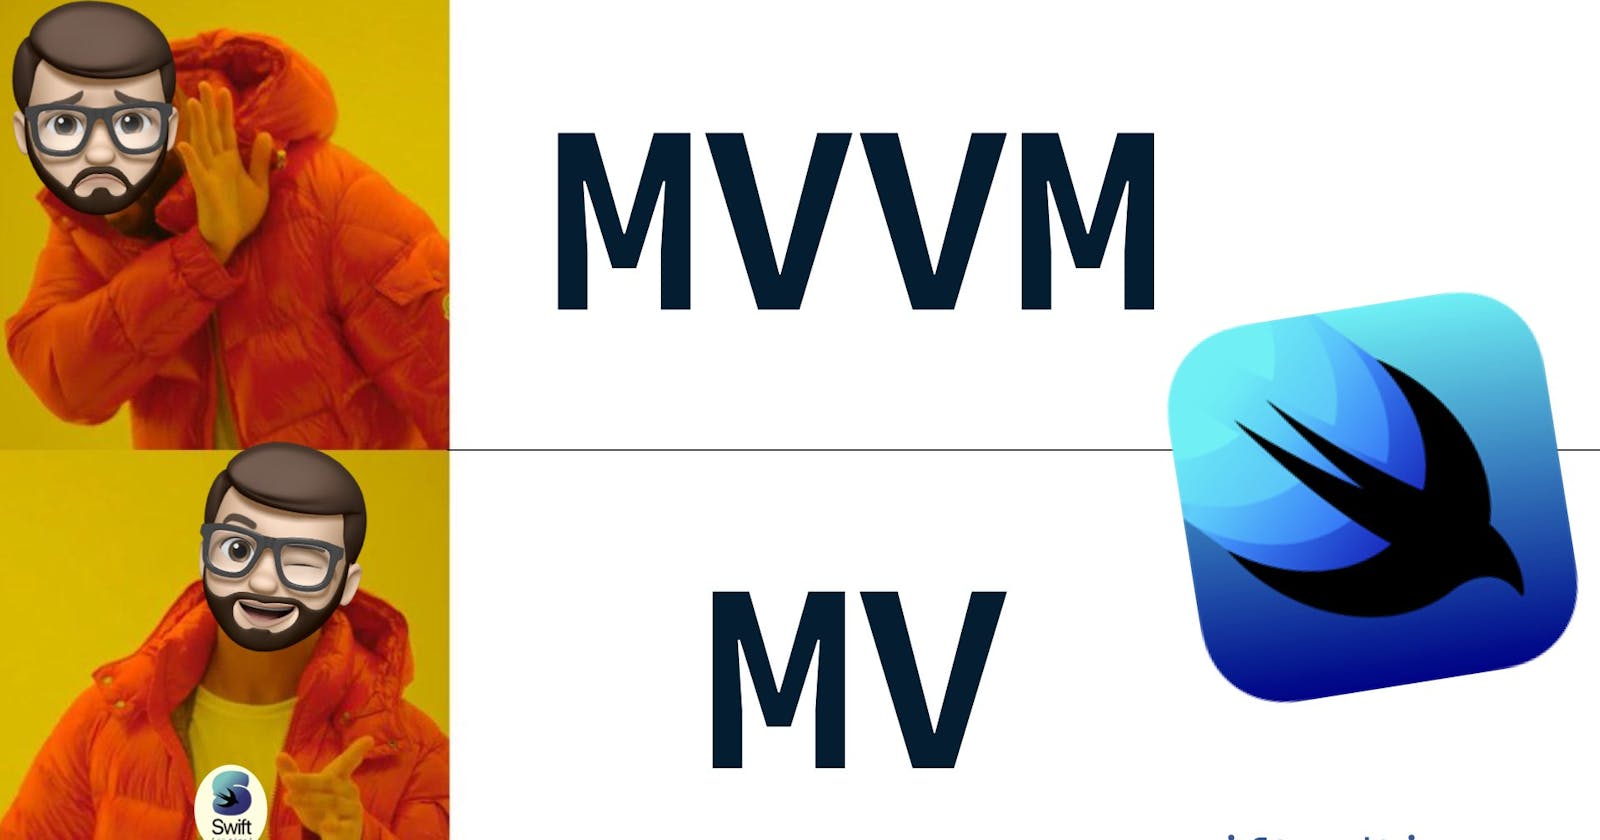 Is MVVM Necessary for Developing Apps with SwiftUI?